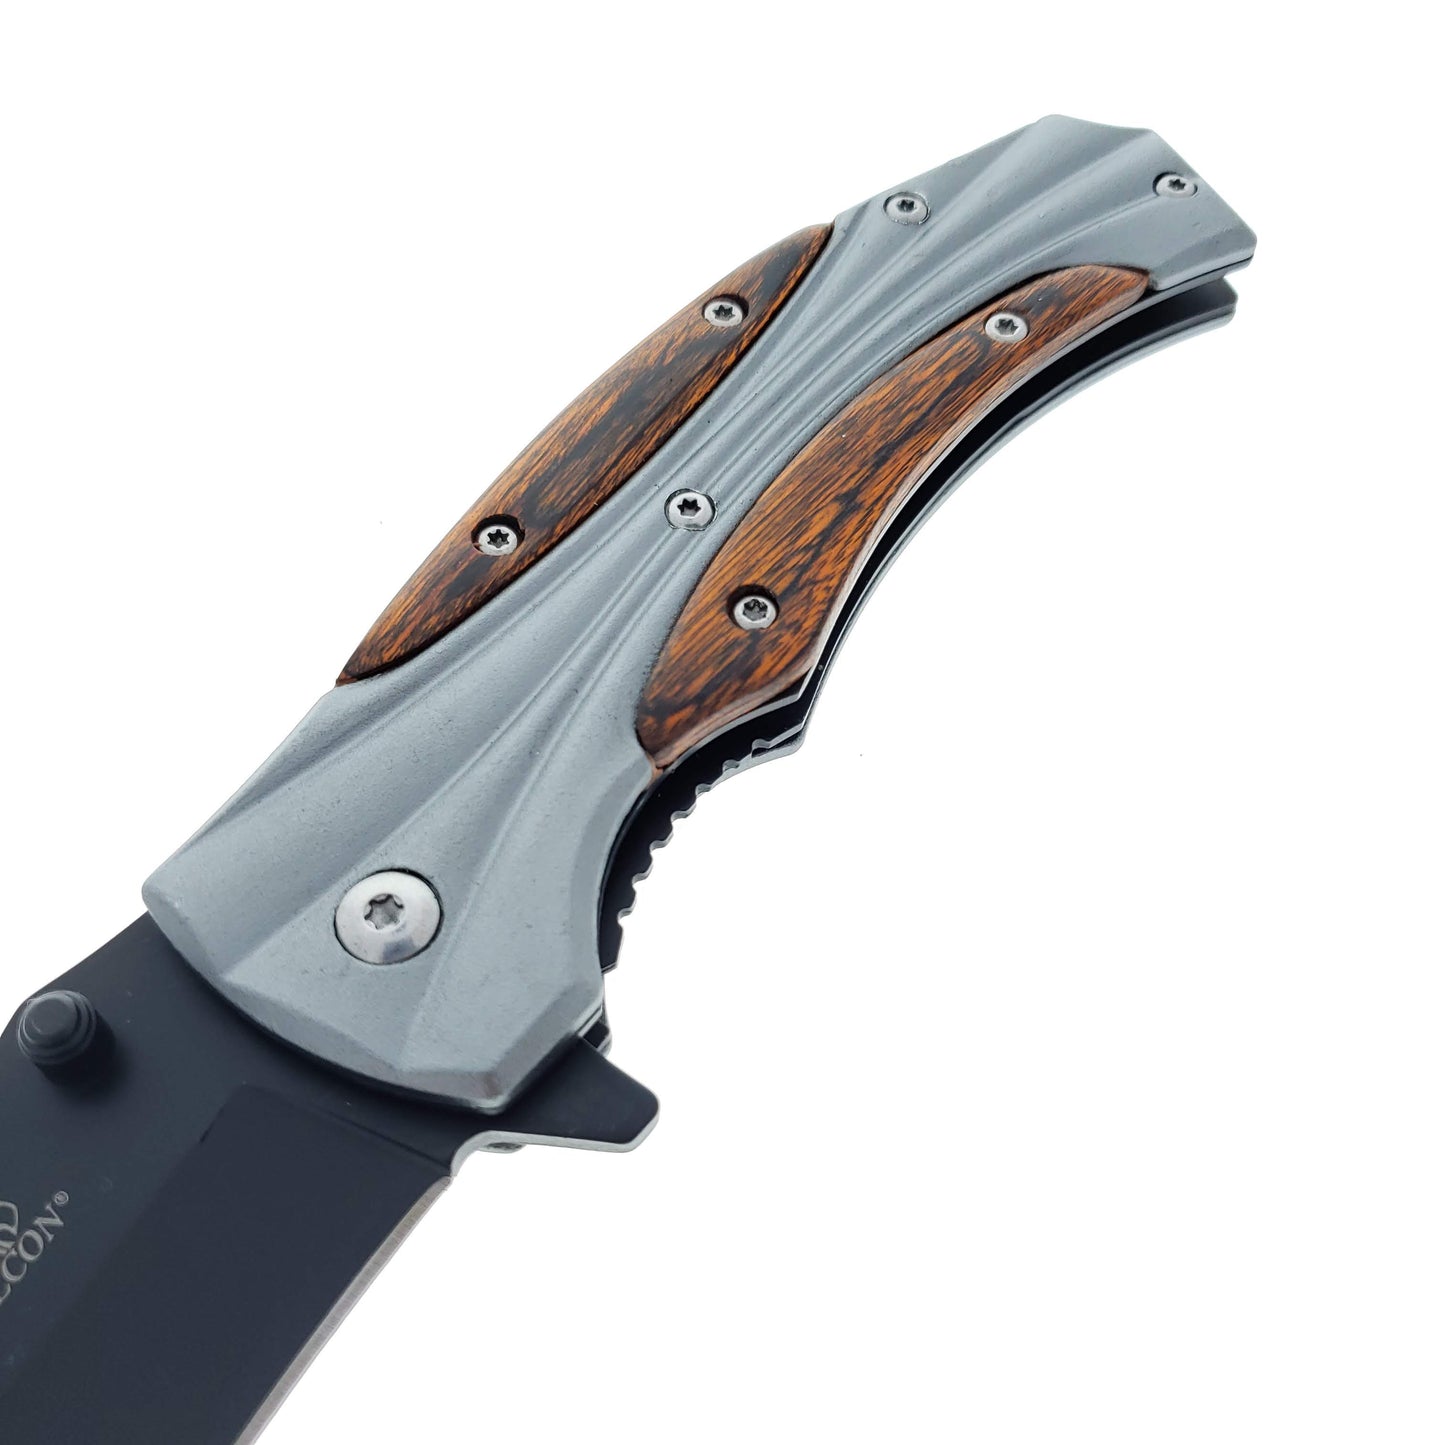 Falcon 8" Overall Metal and Wood Handle Spring Assisted Knife